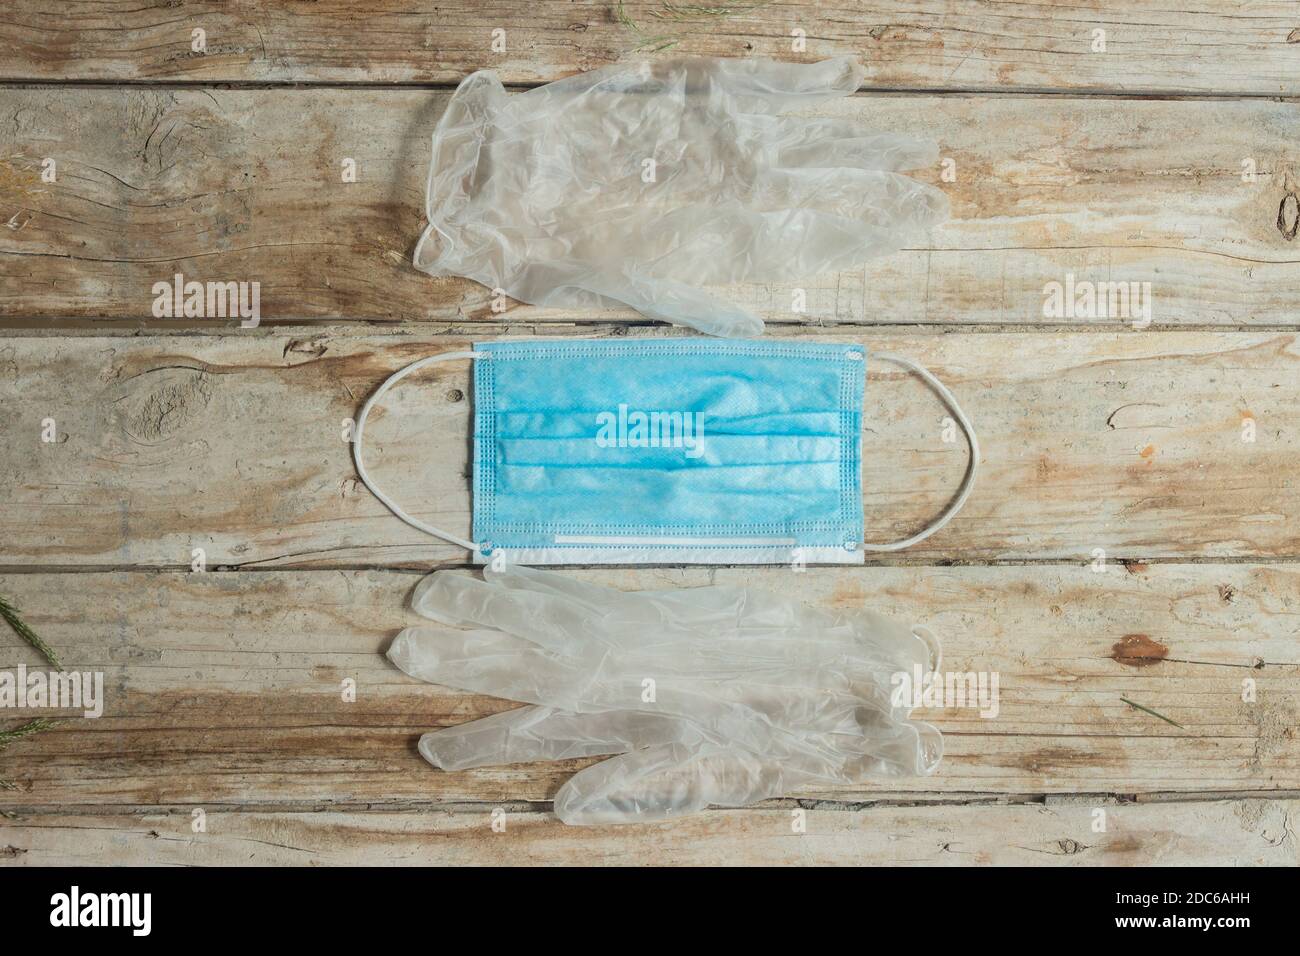 Two transparent plastic gloves and a surgical mask on a wooden table in the interior of a studio. Stock Photo